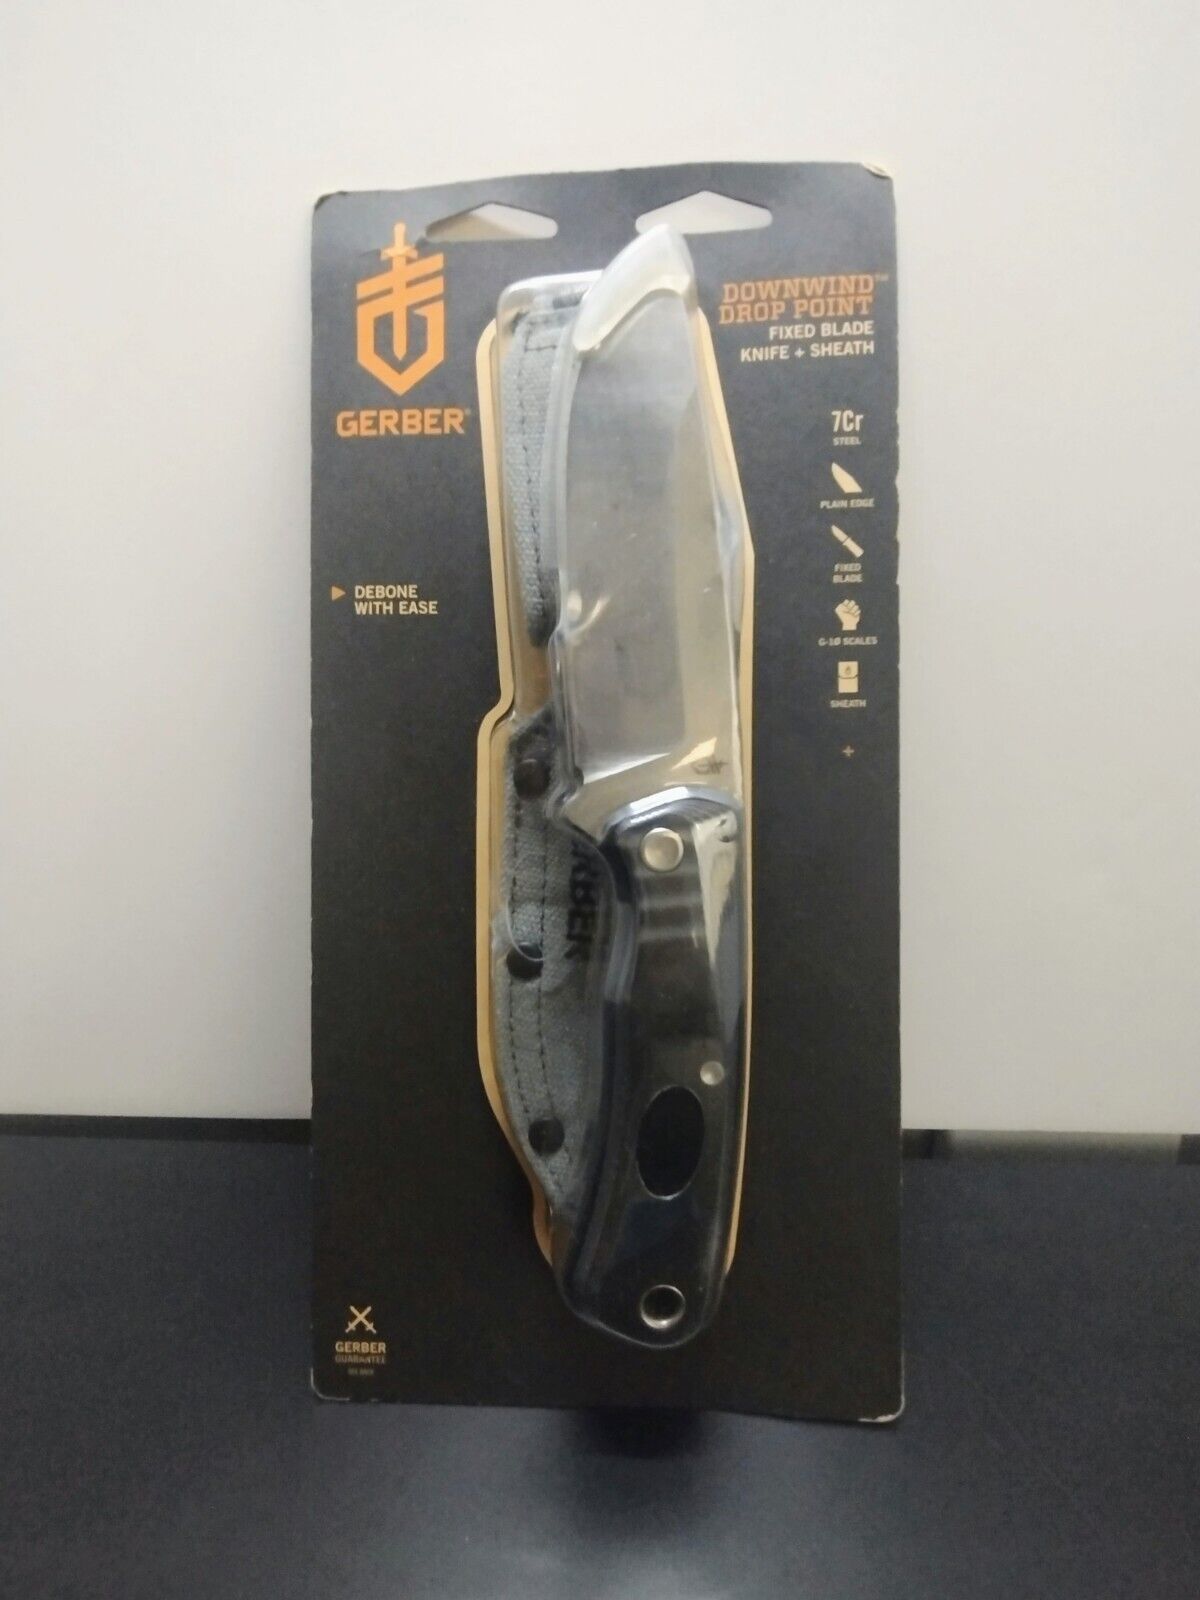 Gerber Gear Downwind Drop Point Hunting Knife w/Sheath for Camping & Hunting